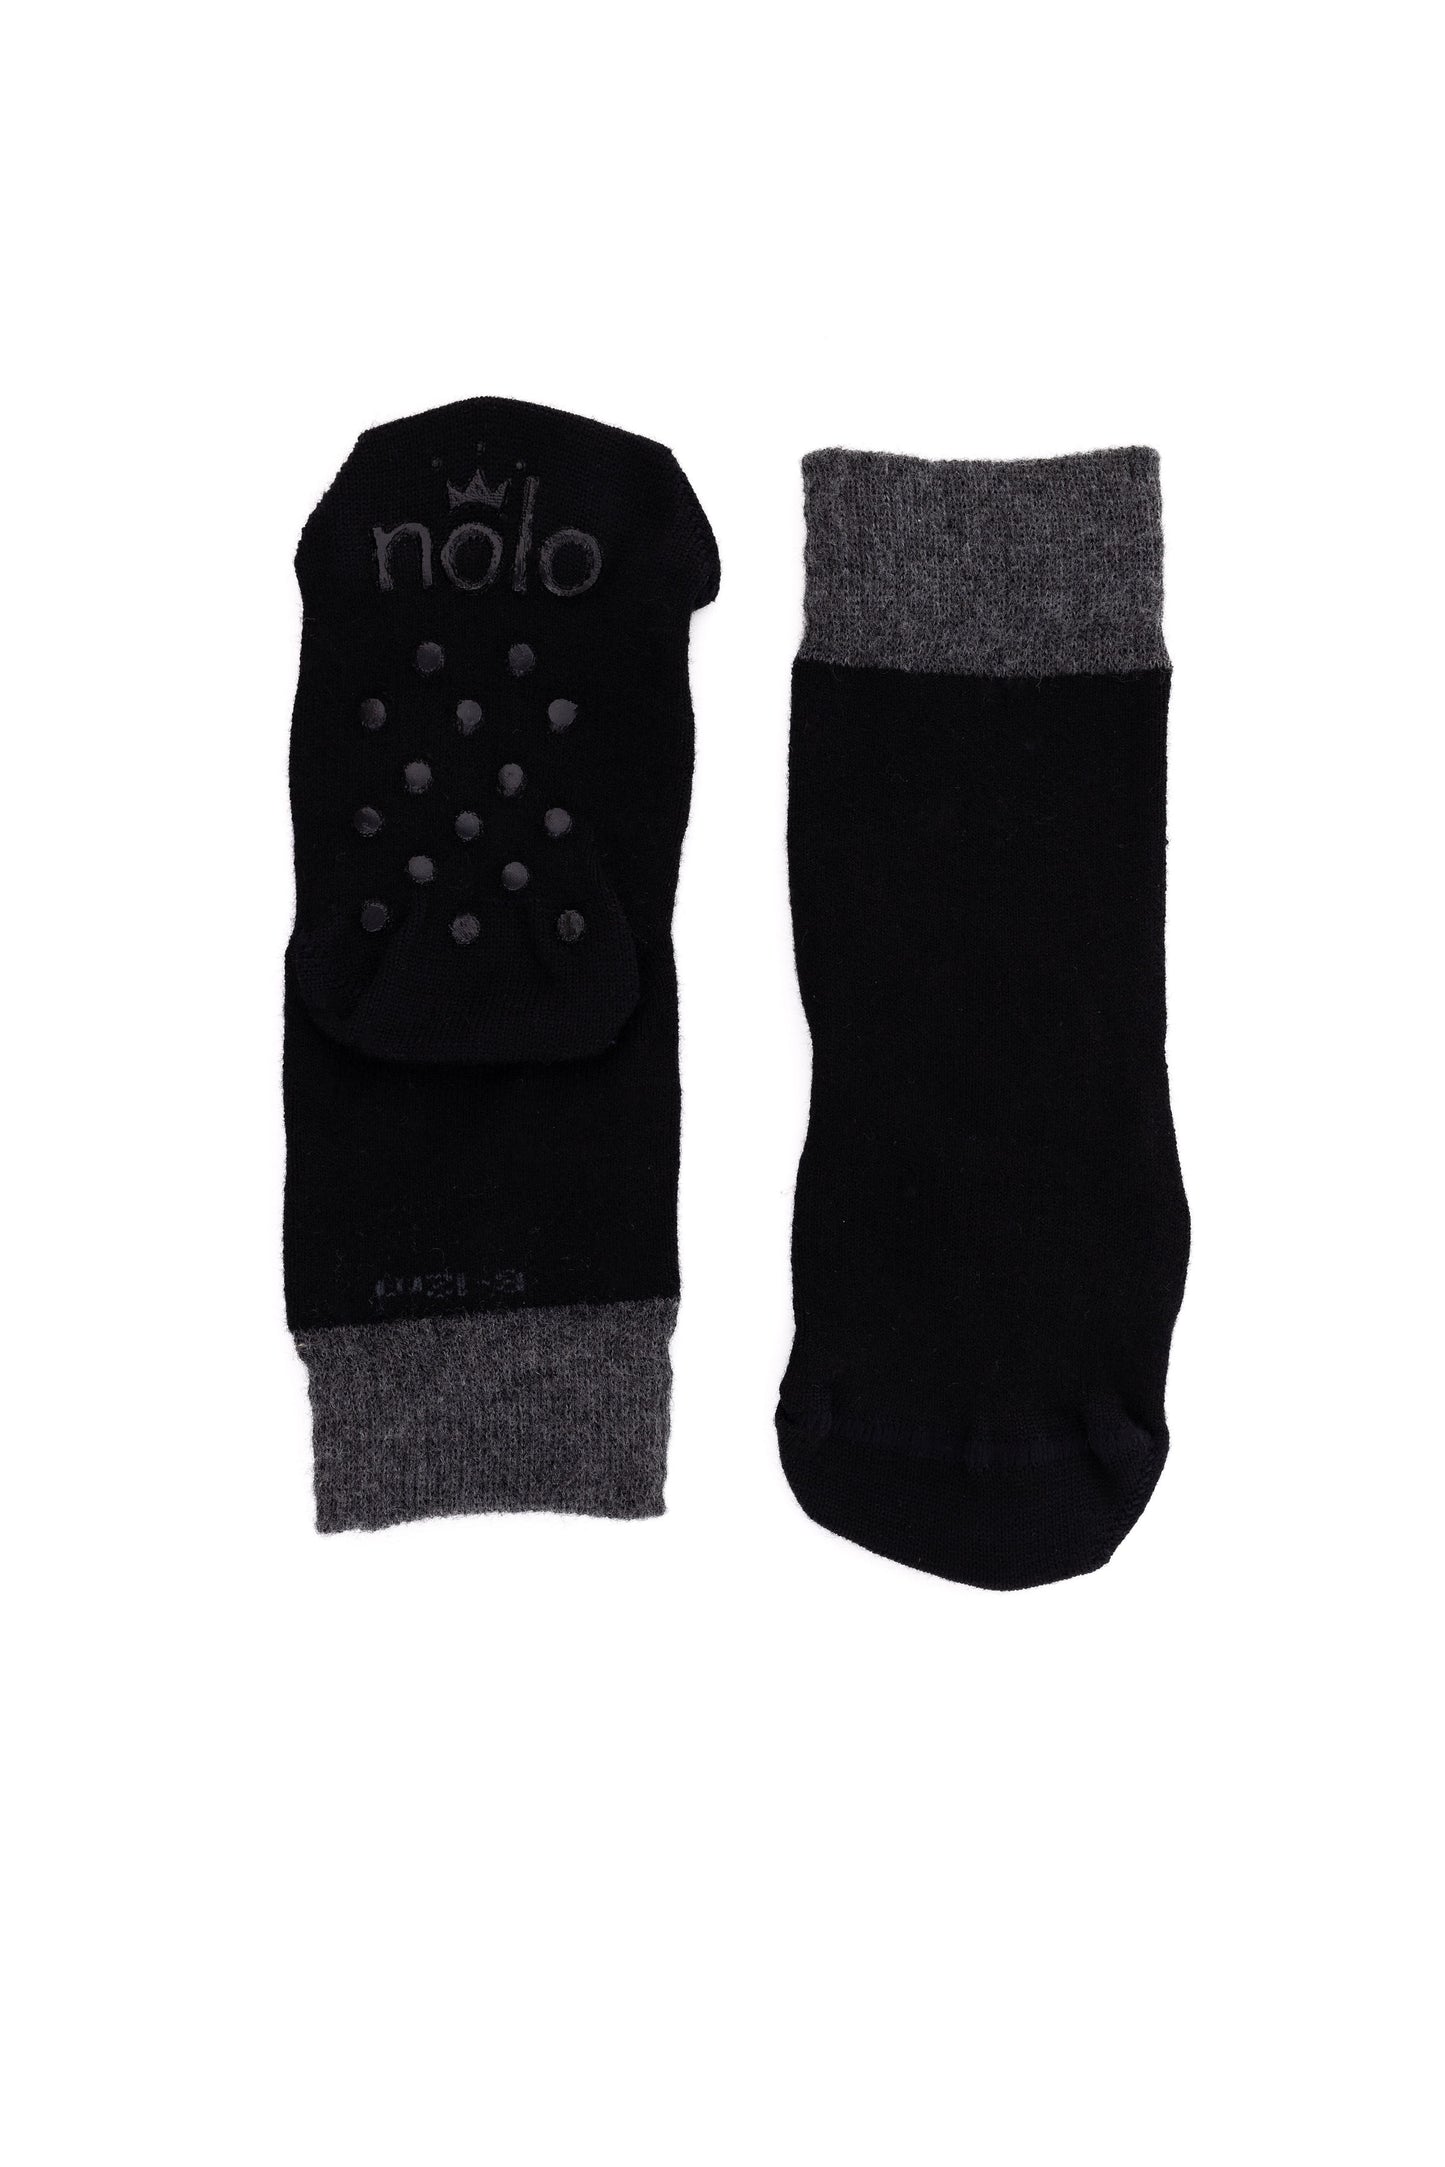 *Limited Edition* Matchy Gripper Socks